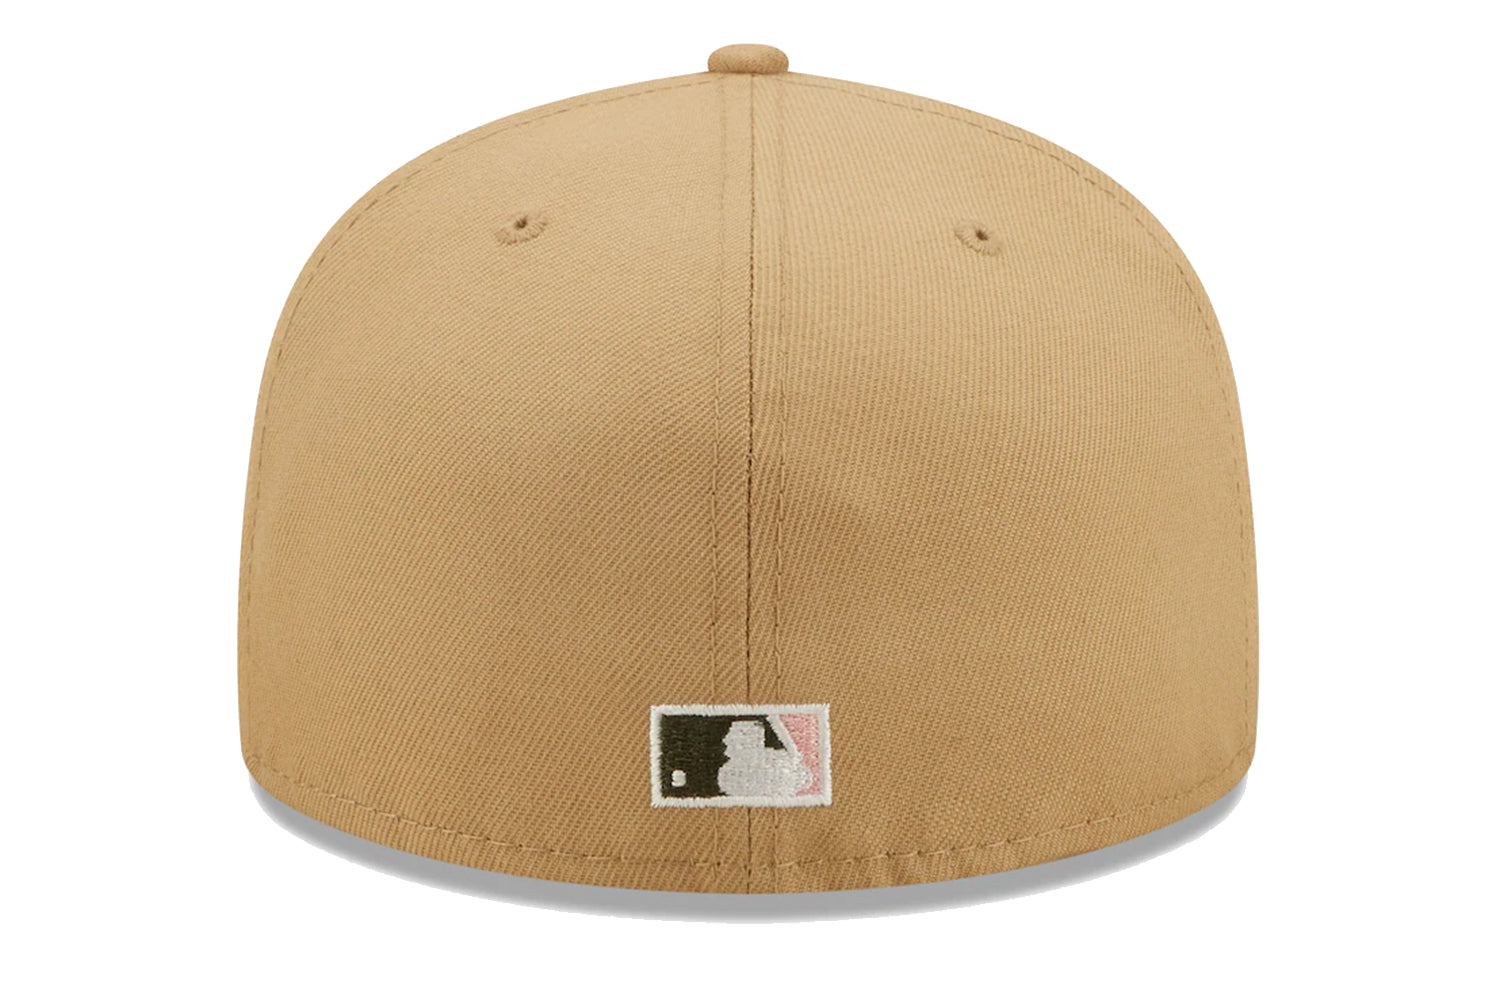 NEW ERA MLB LOS ANGELES DODGERS CAMEL PINK OLIVE 1992 ALL STAR GAME 59FIFTY FITTED